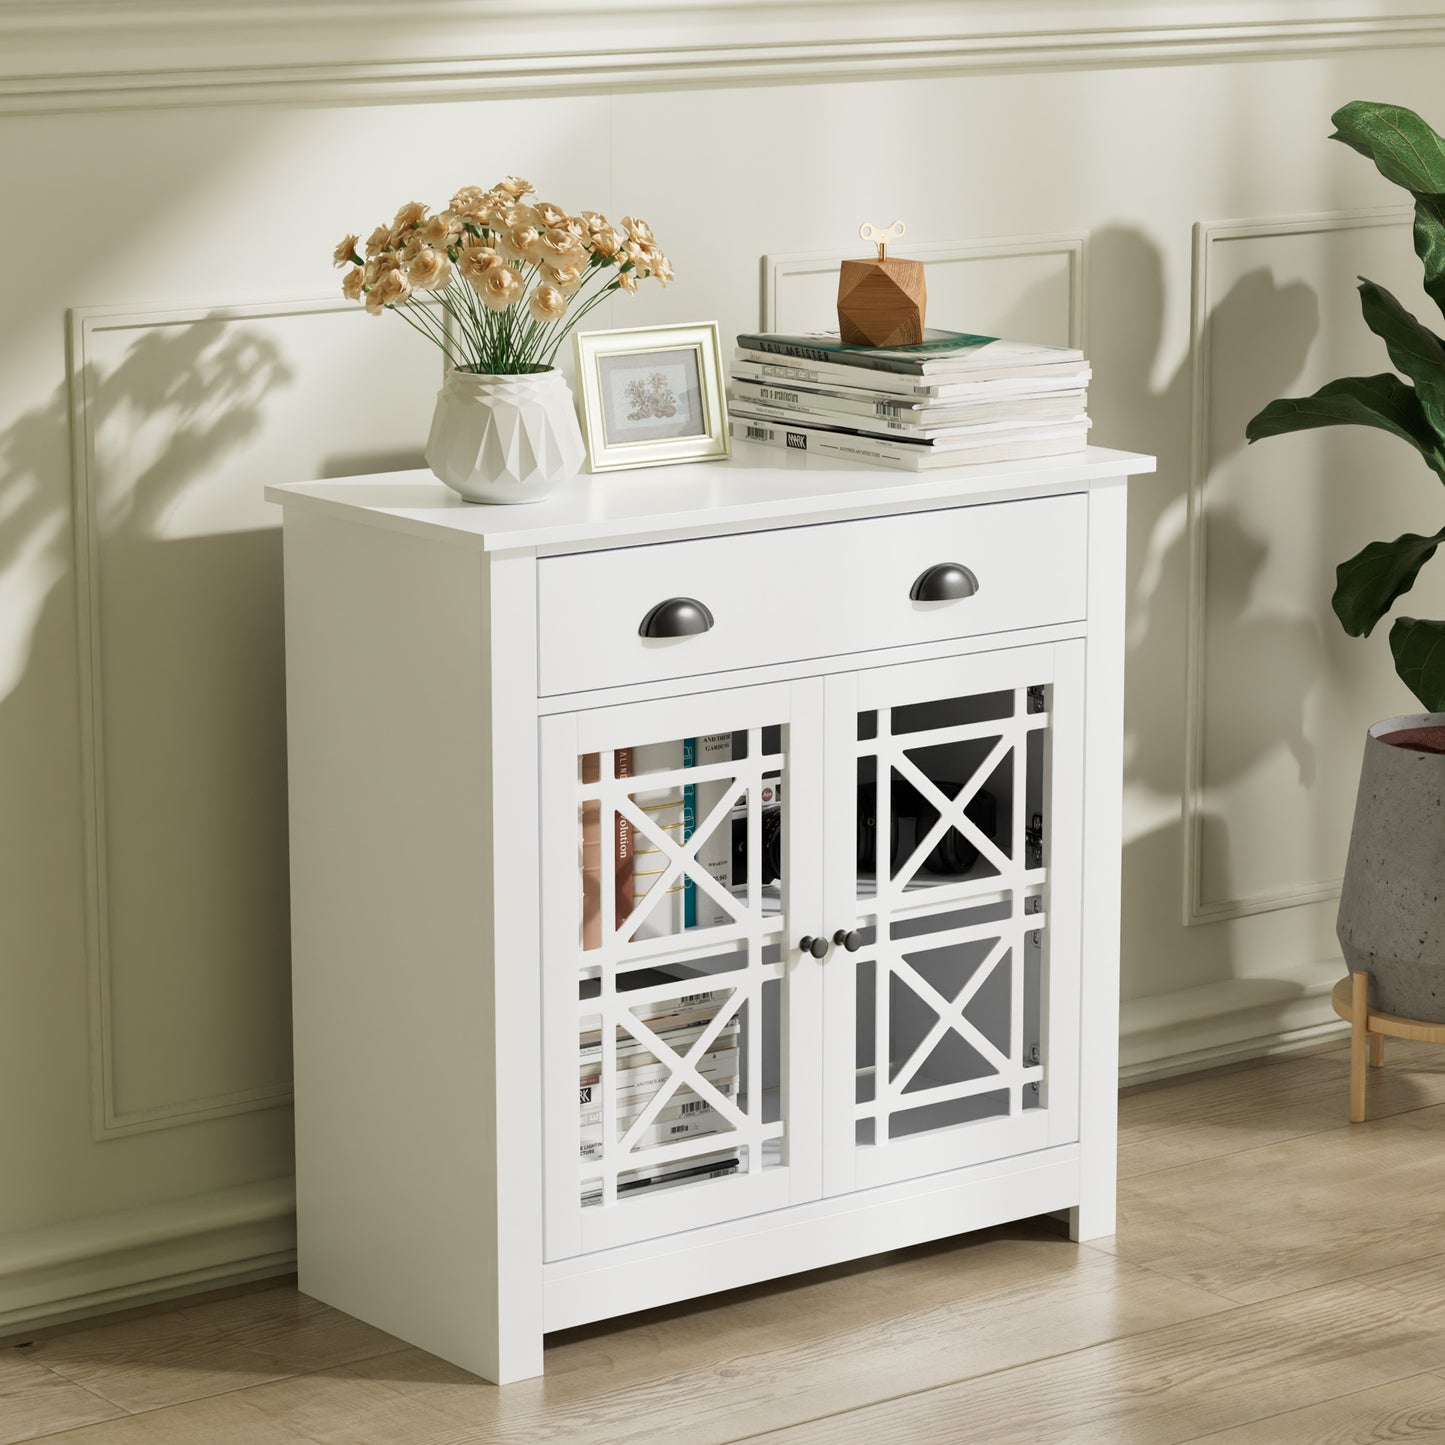 Kitchen Storage Cabinet with Doors and Adjustable Shelf, 31.4" W x 31.4" H Freestanding Buffet Sidebord, Accent Cabinet for Kitchen, Dining Room, White